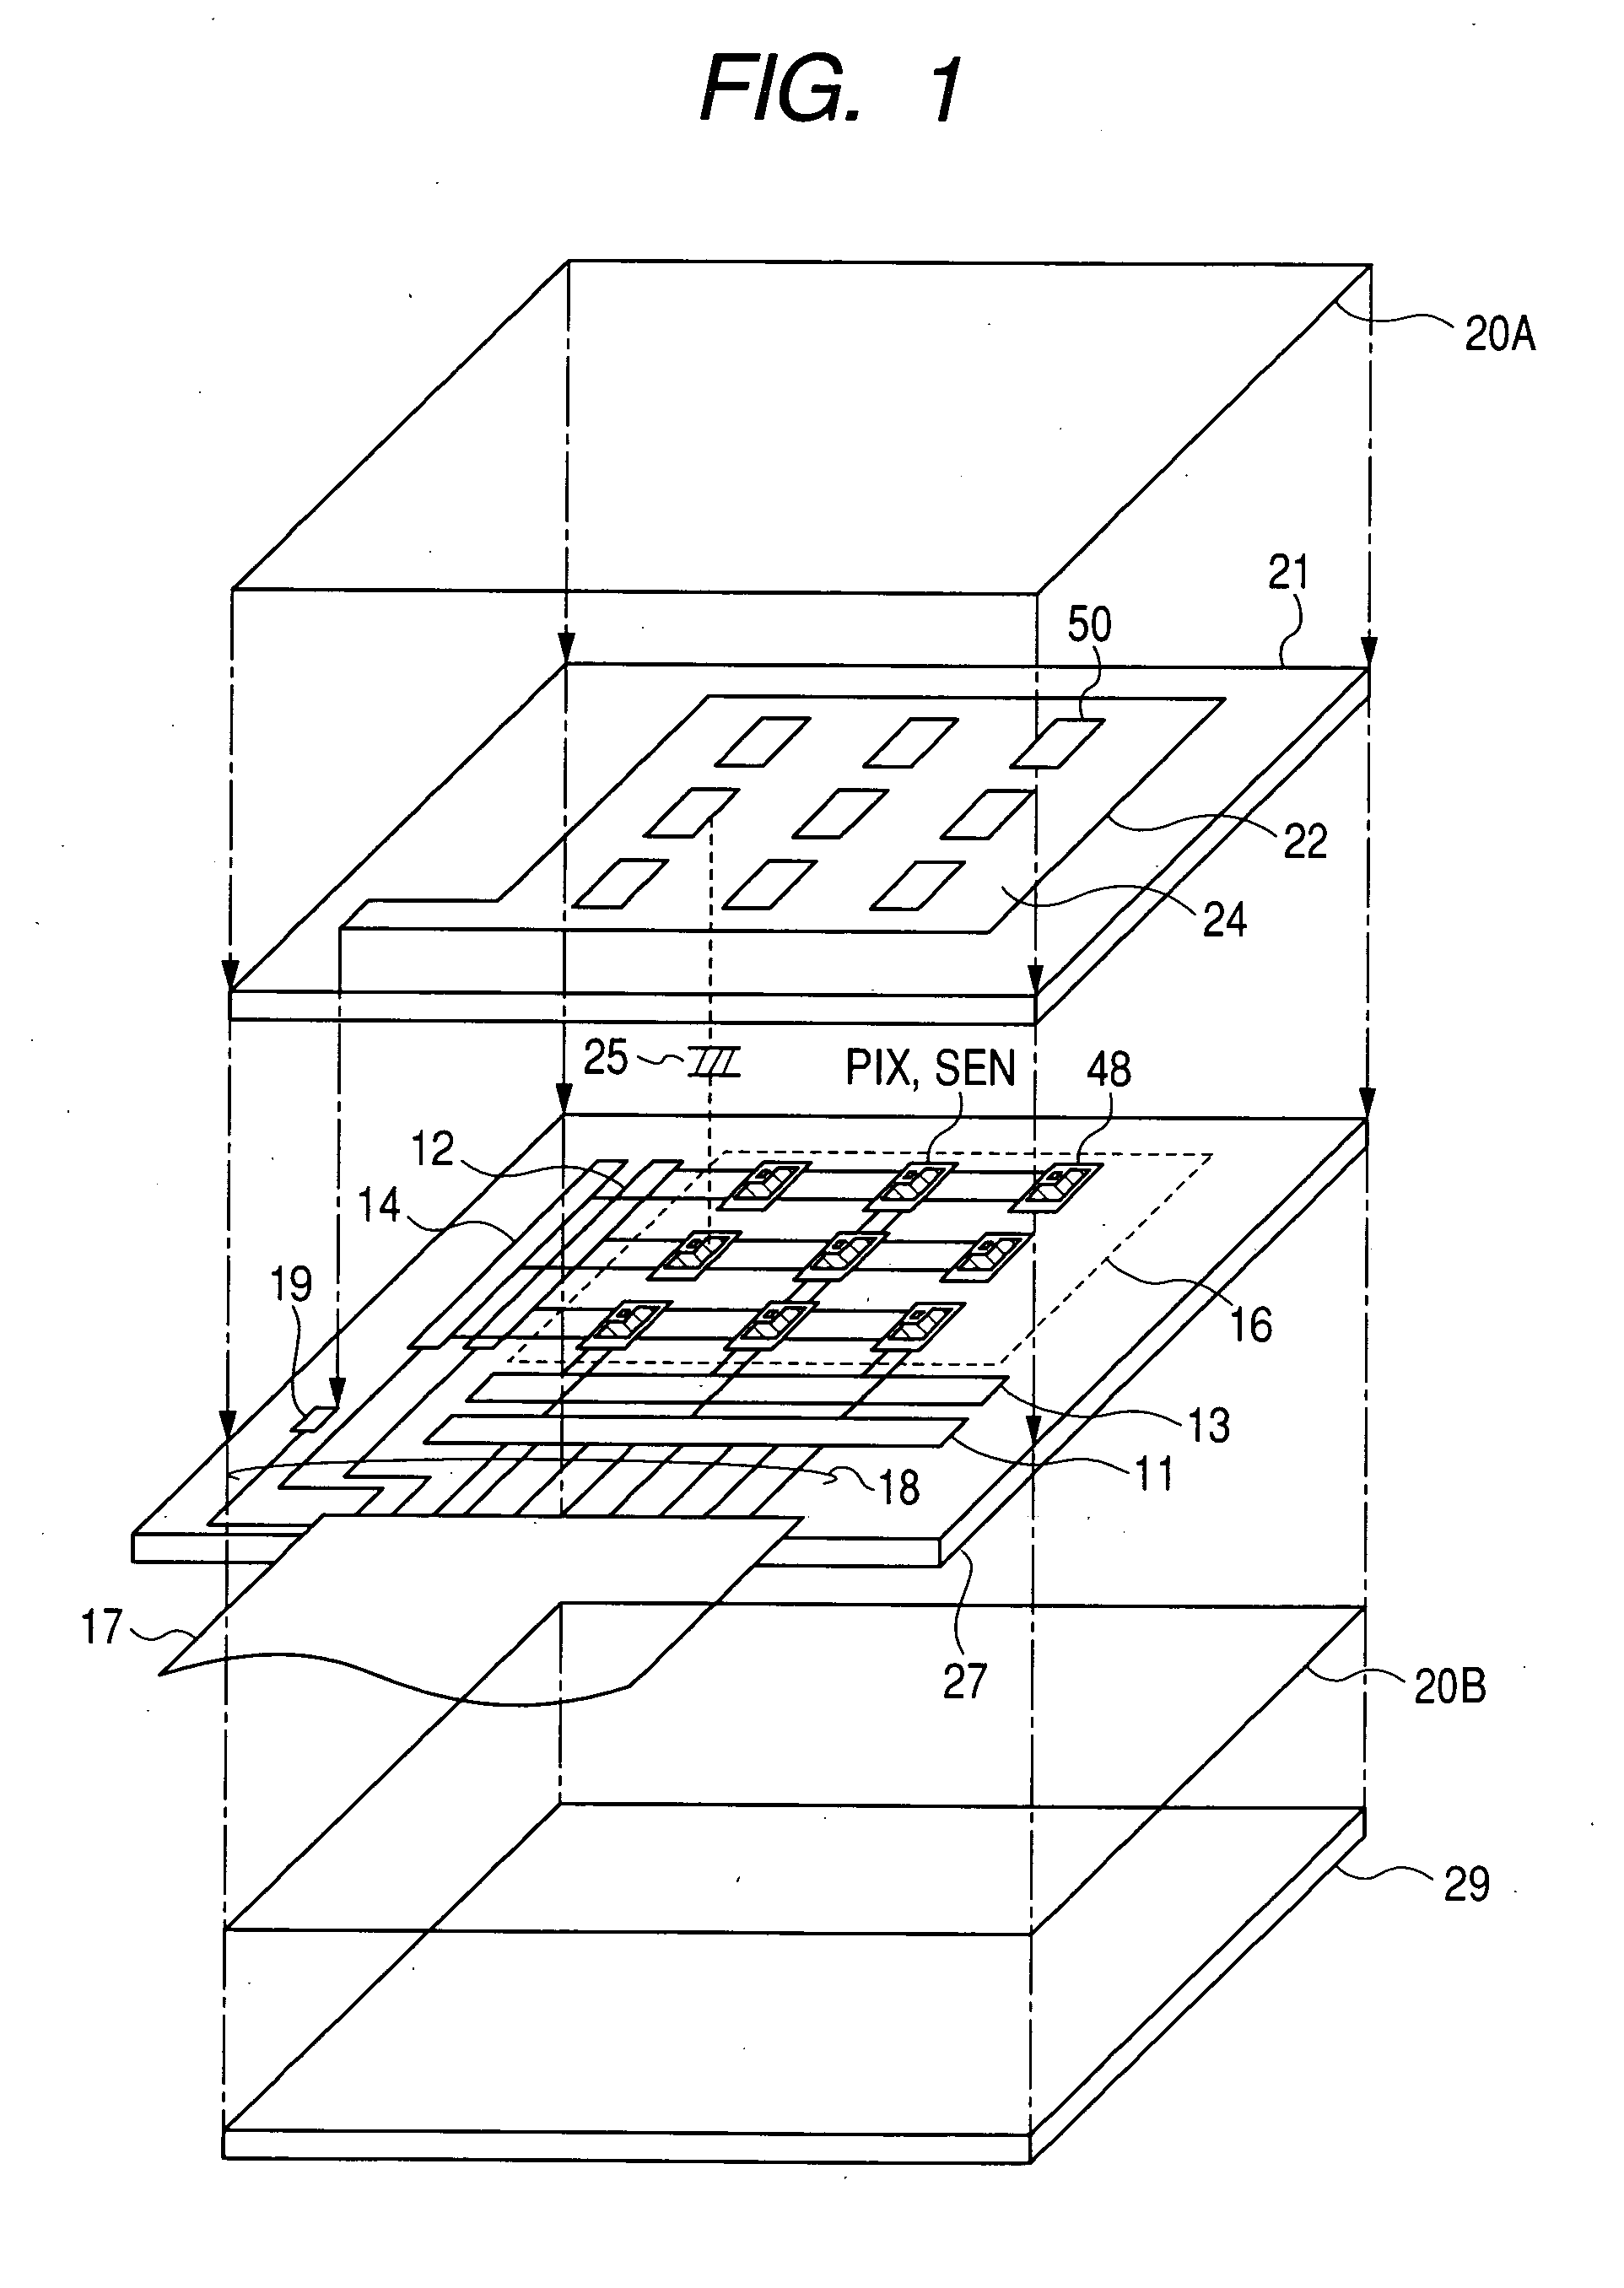 Image display apparatus with image entry function